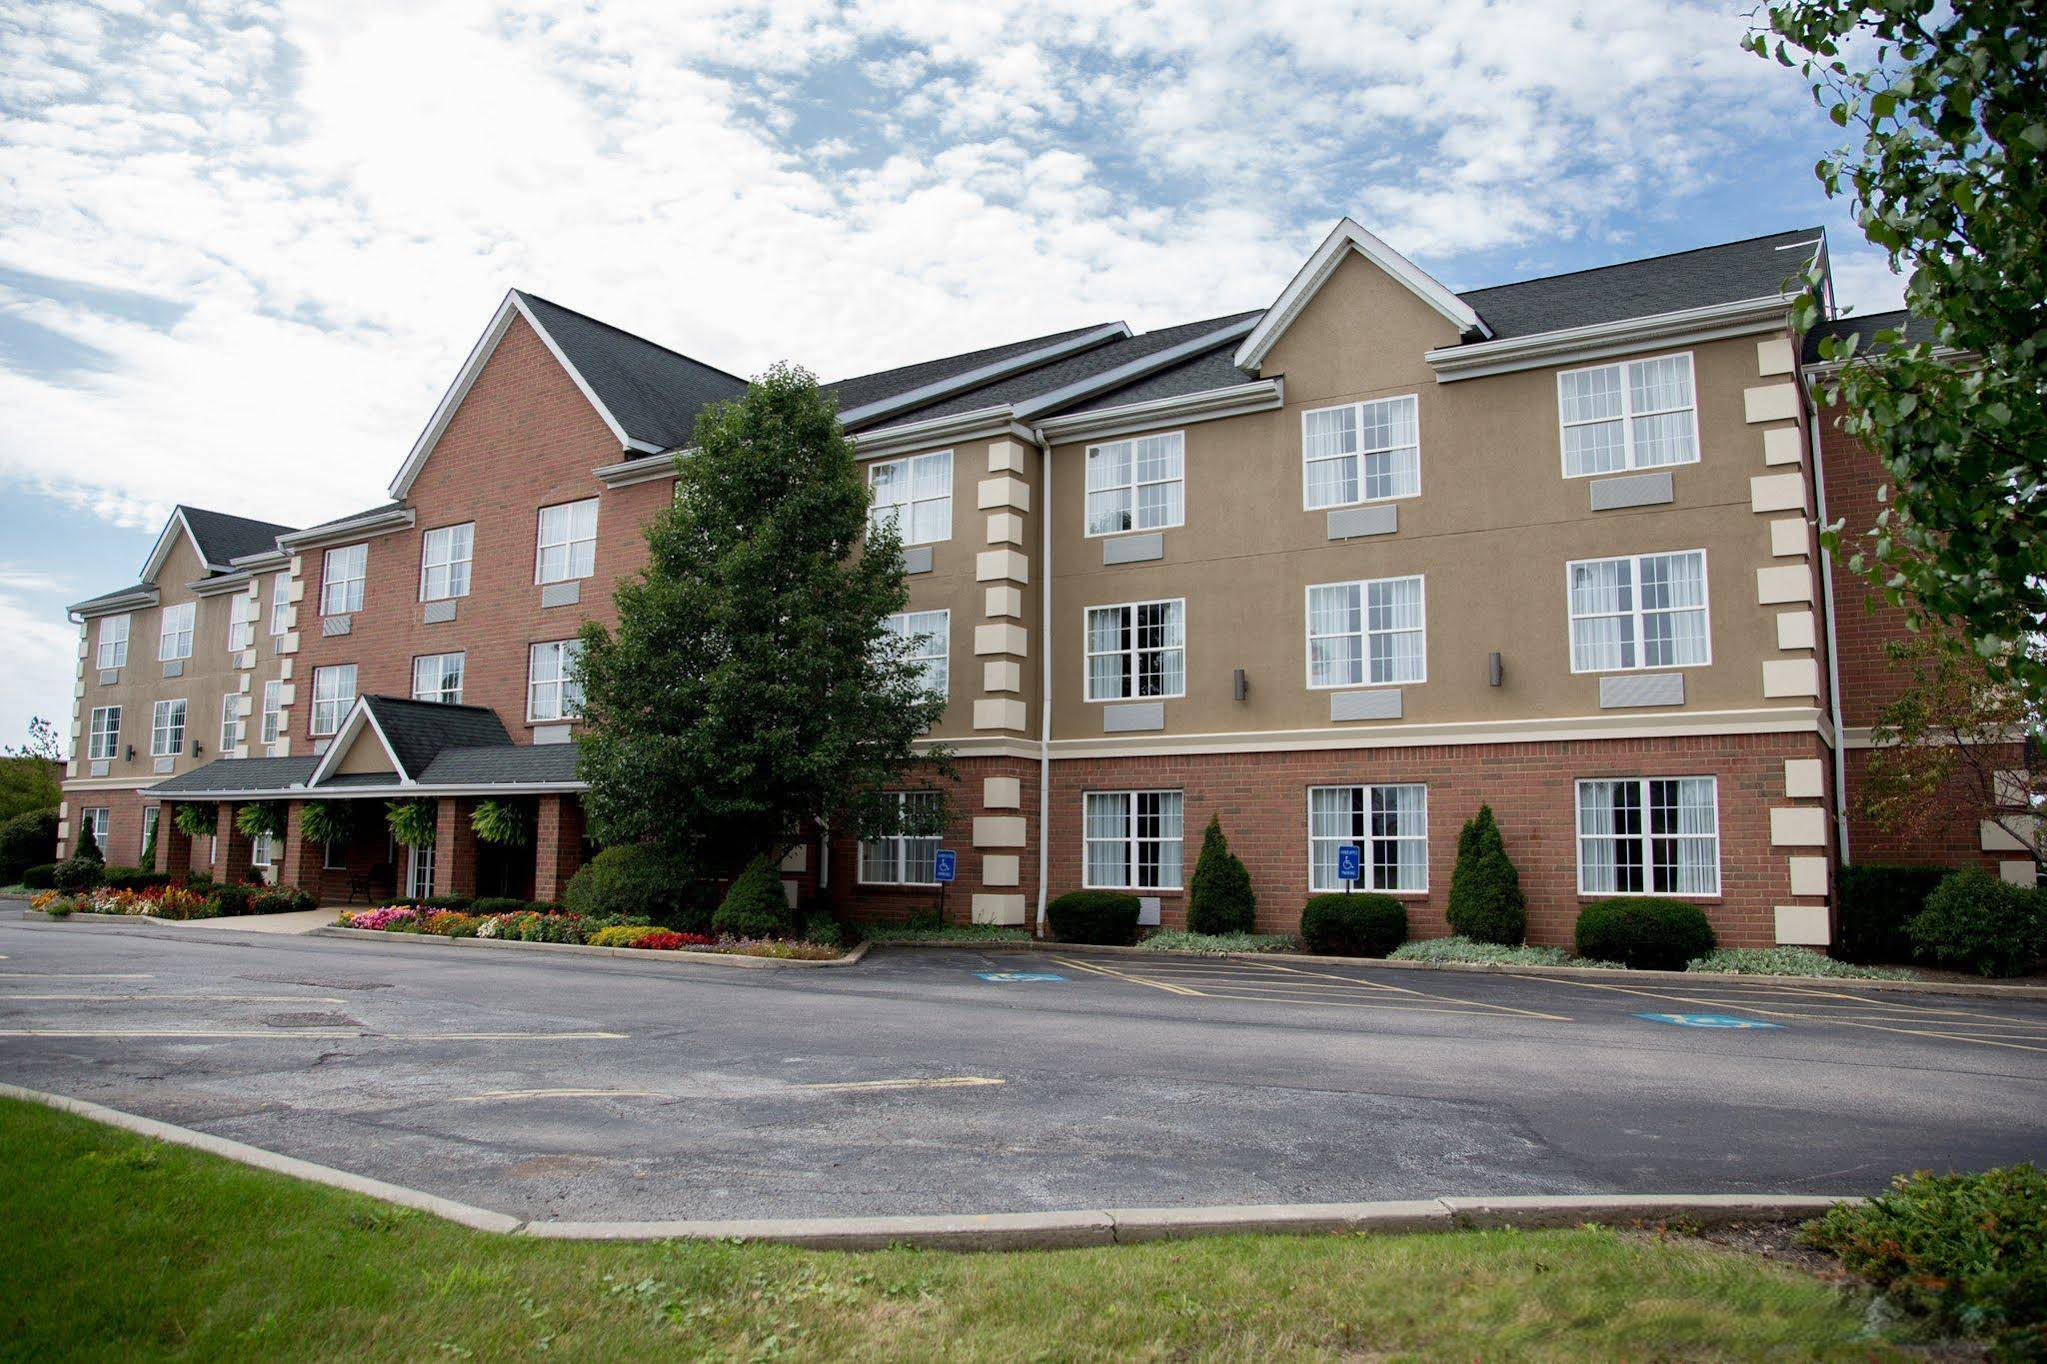 Country Inn & Suites by Radisson, Macedonia, Oh